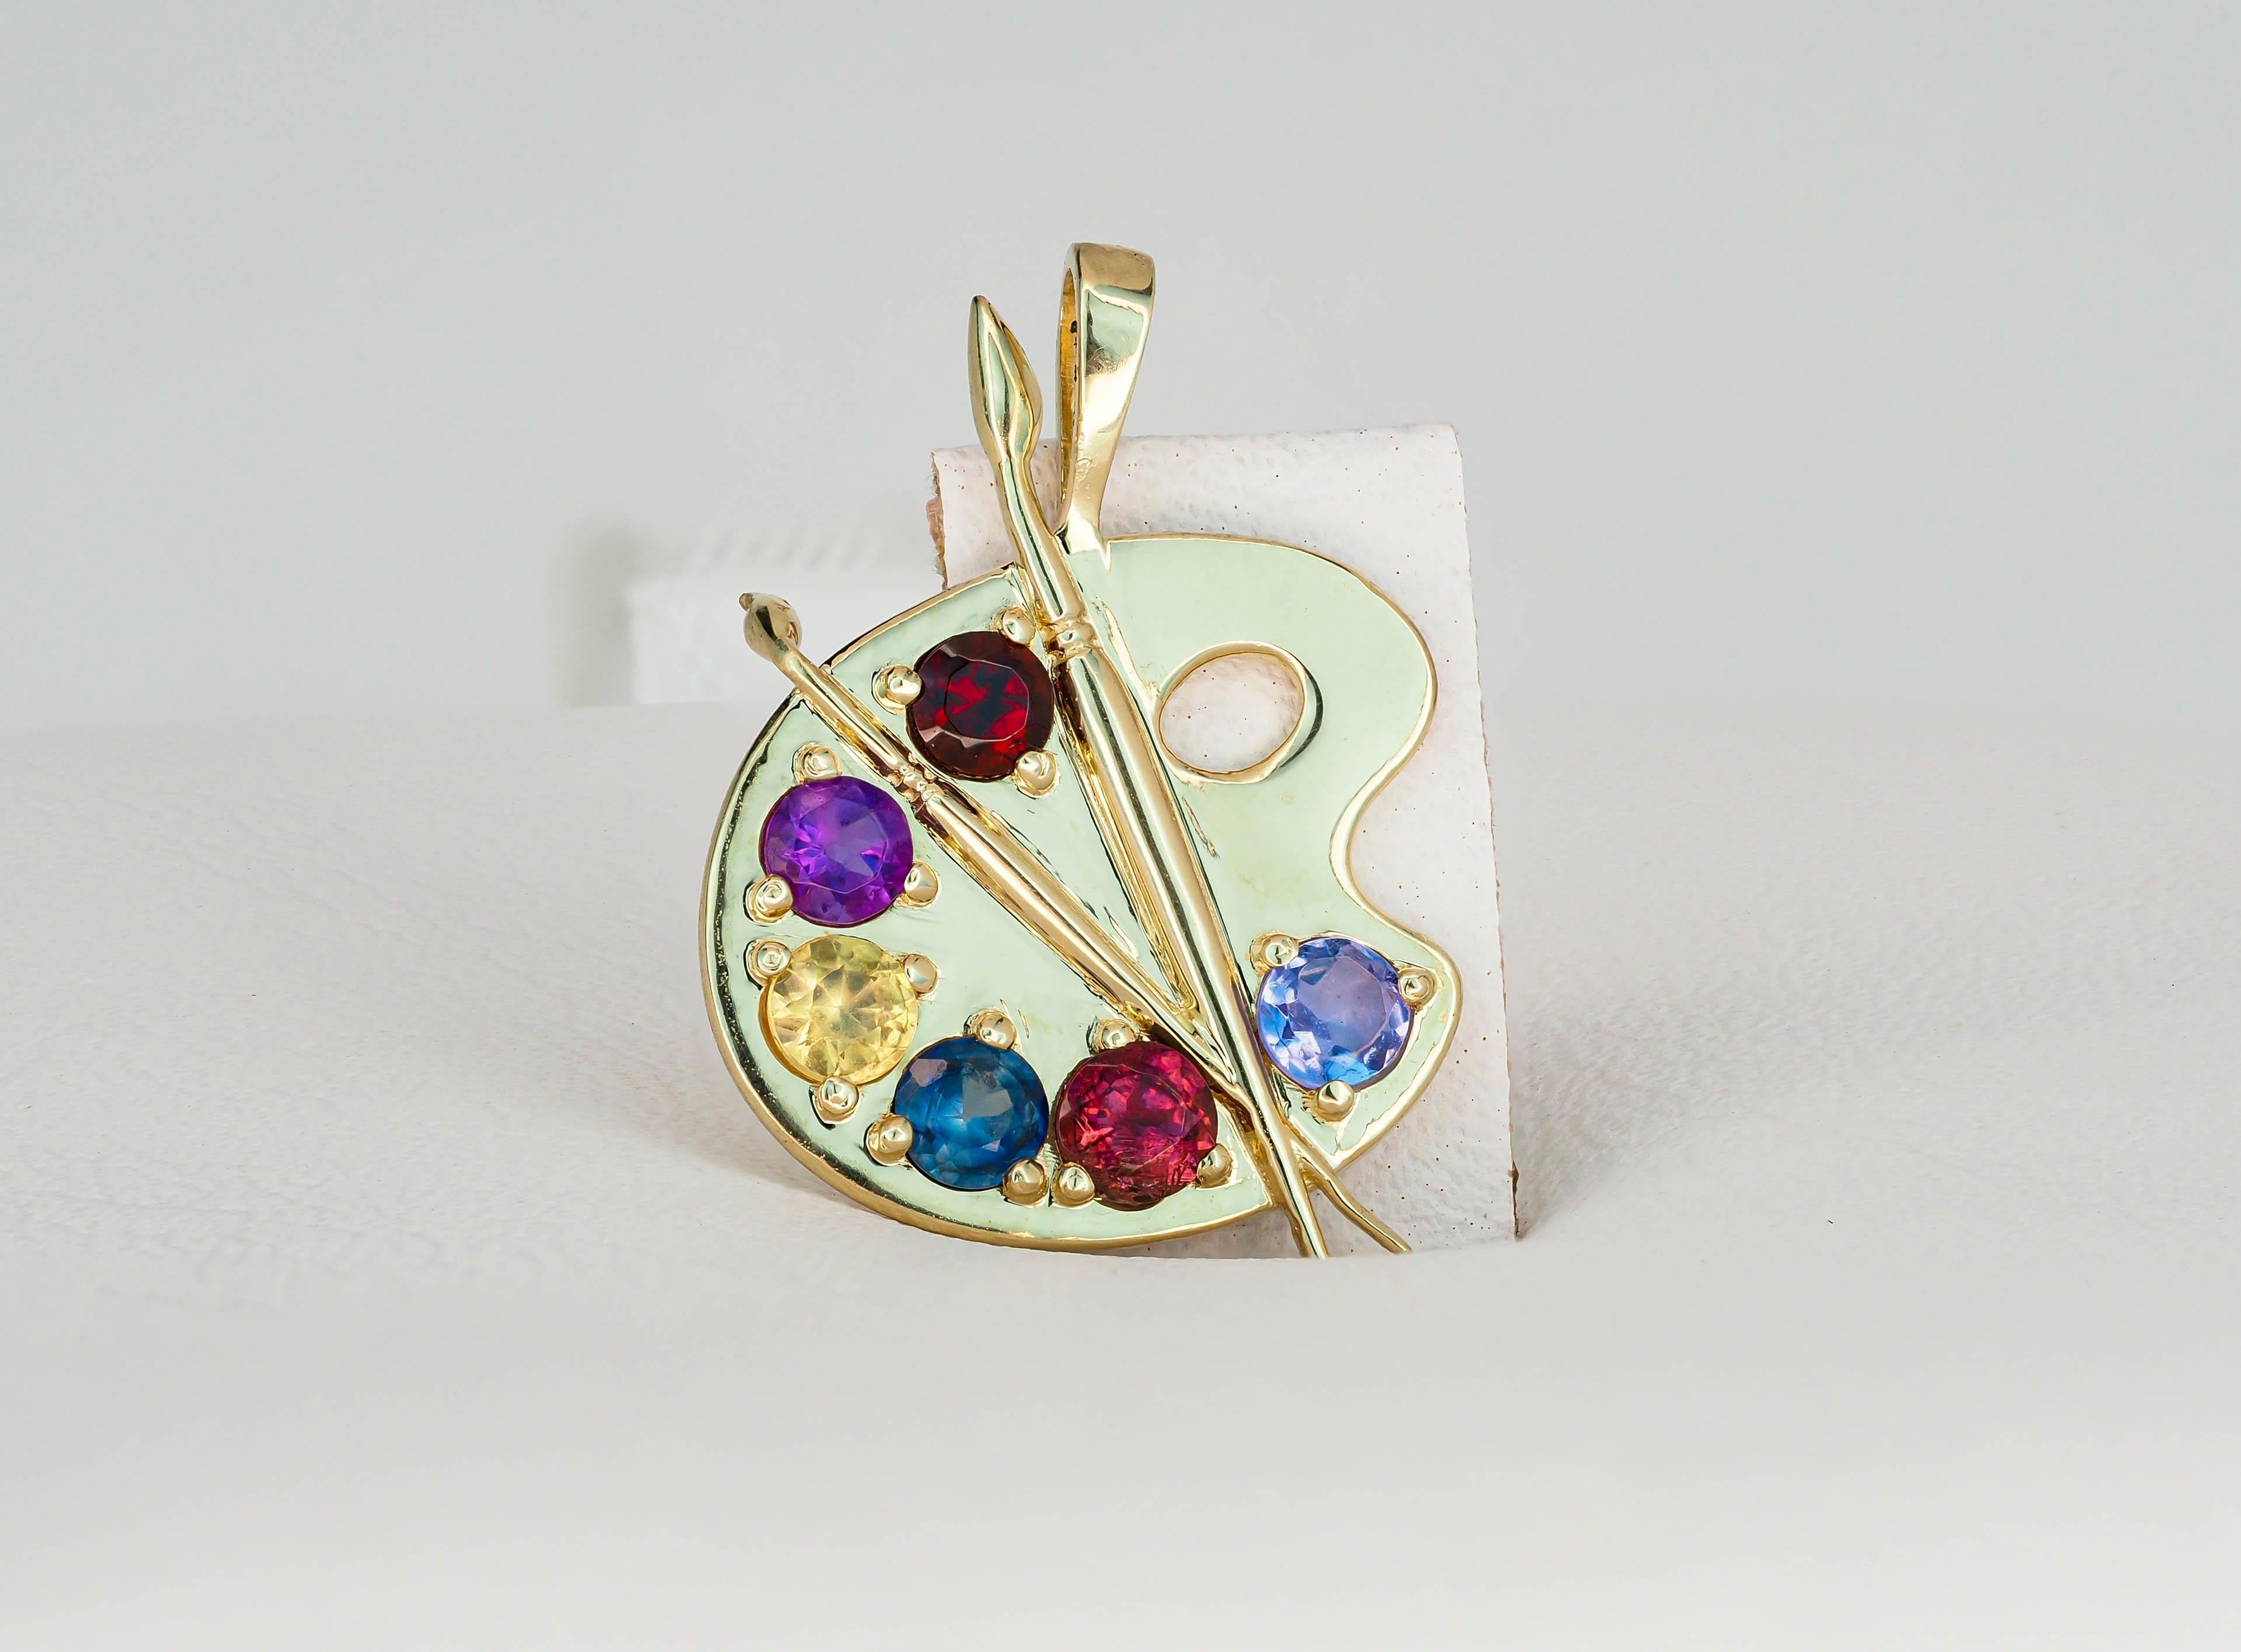 Palette with paints 14 kt solid gold pendant with colored stones.

Metal: 14k gold
Size: 17.6 x 18 mm.

Total weight 1.61 g. 

Natural gemstones:
Amethyst, sapphires, tanzanite, garnet - 6 stones
Round shape, colors - bluegreen, violet, red, orange